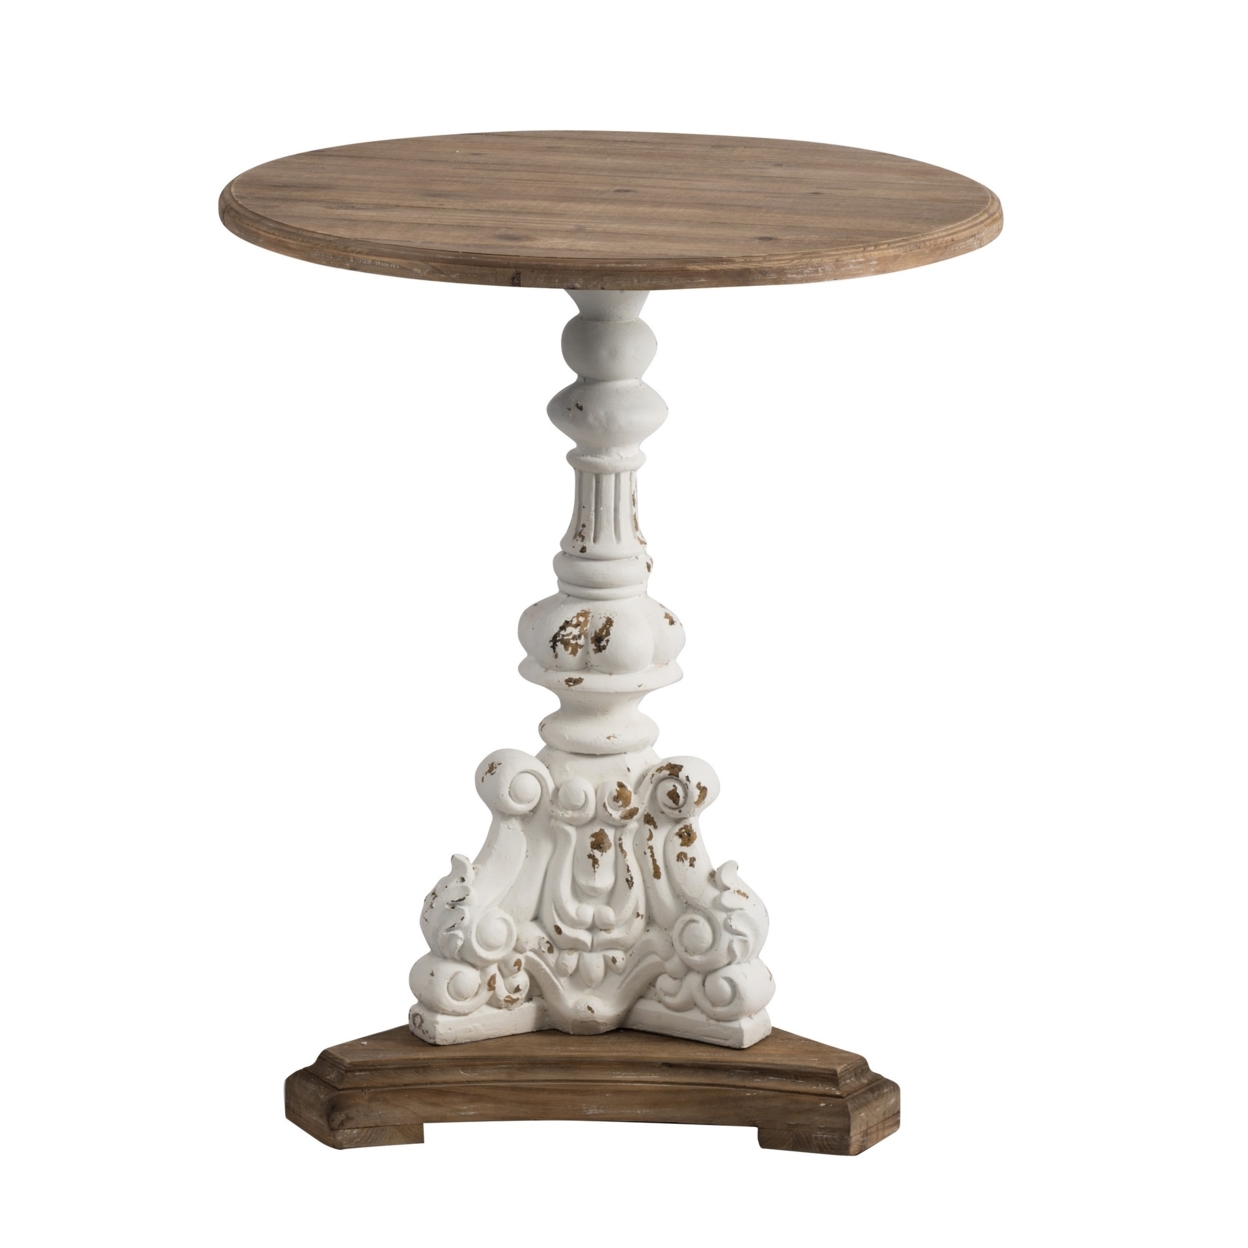 Prana 31 Inch Round Accent Table, Expertly Carved Fir Wood, Brown, Antique White- Saltoro Sherpi